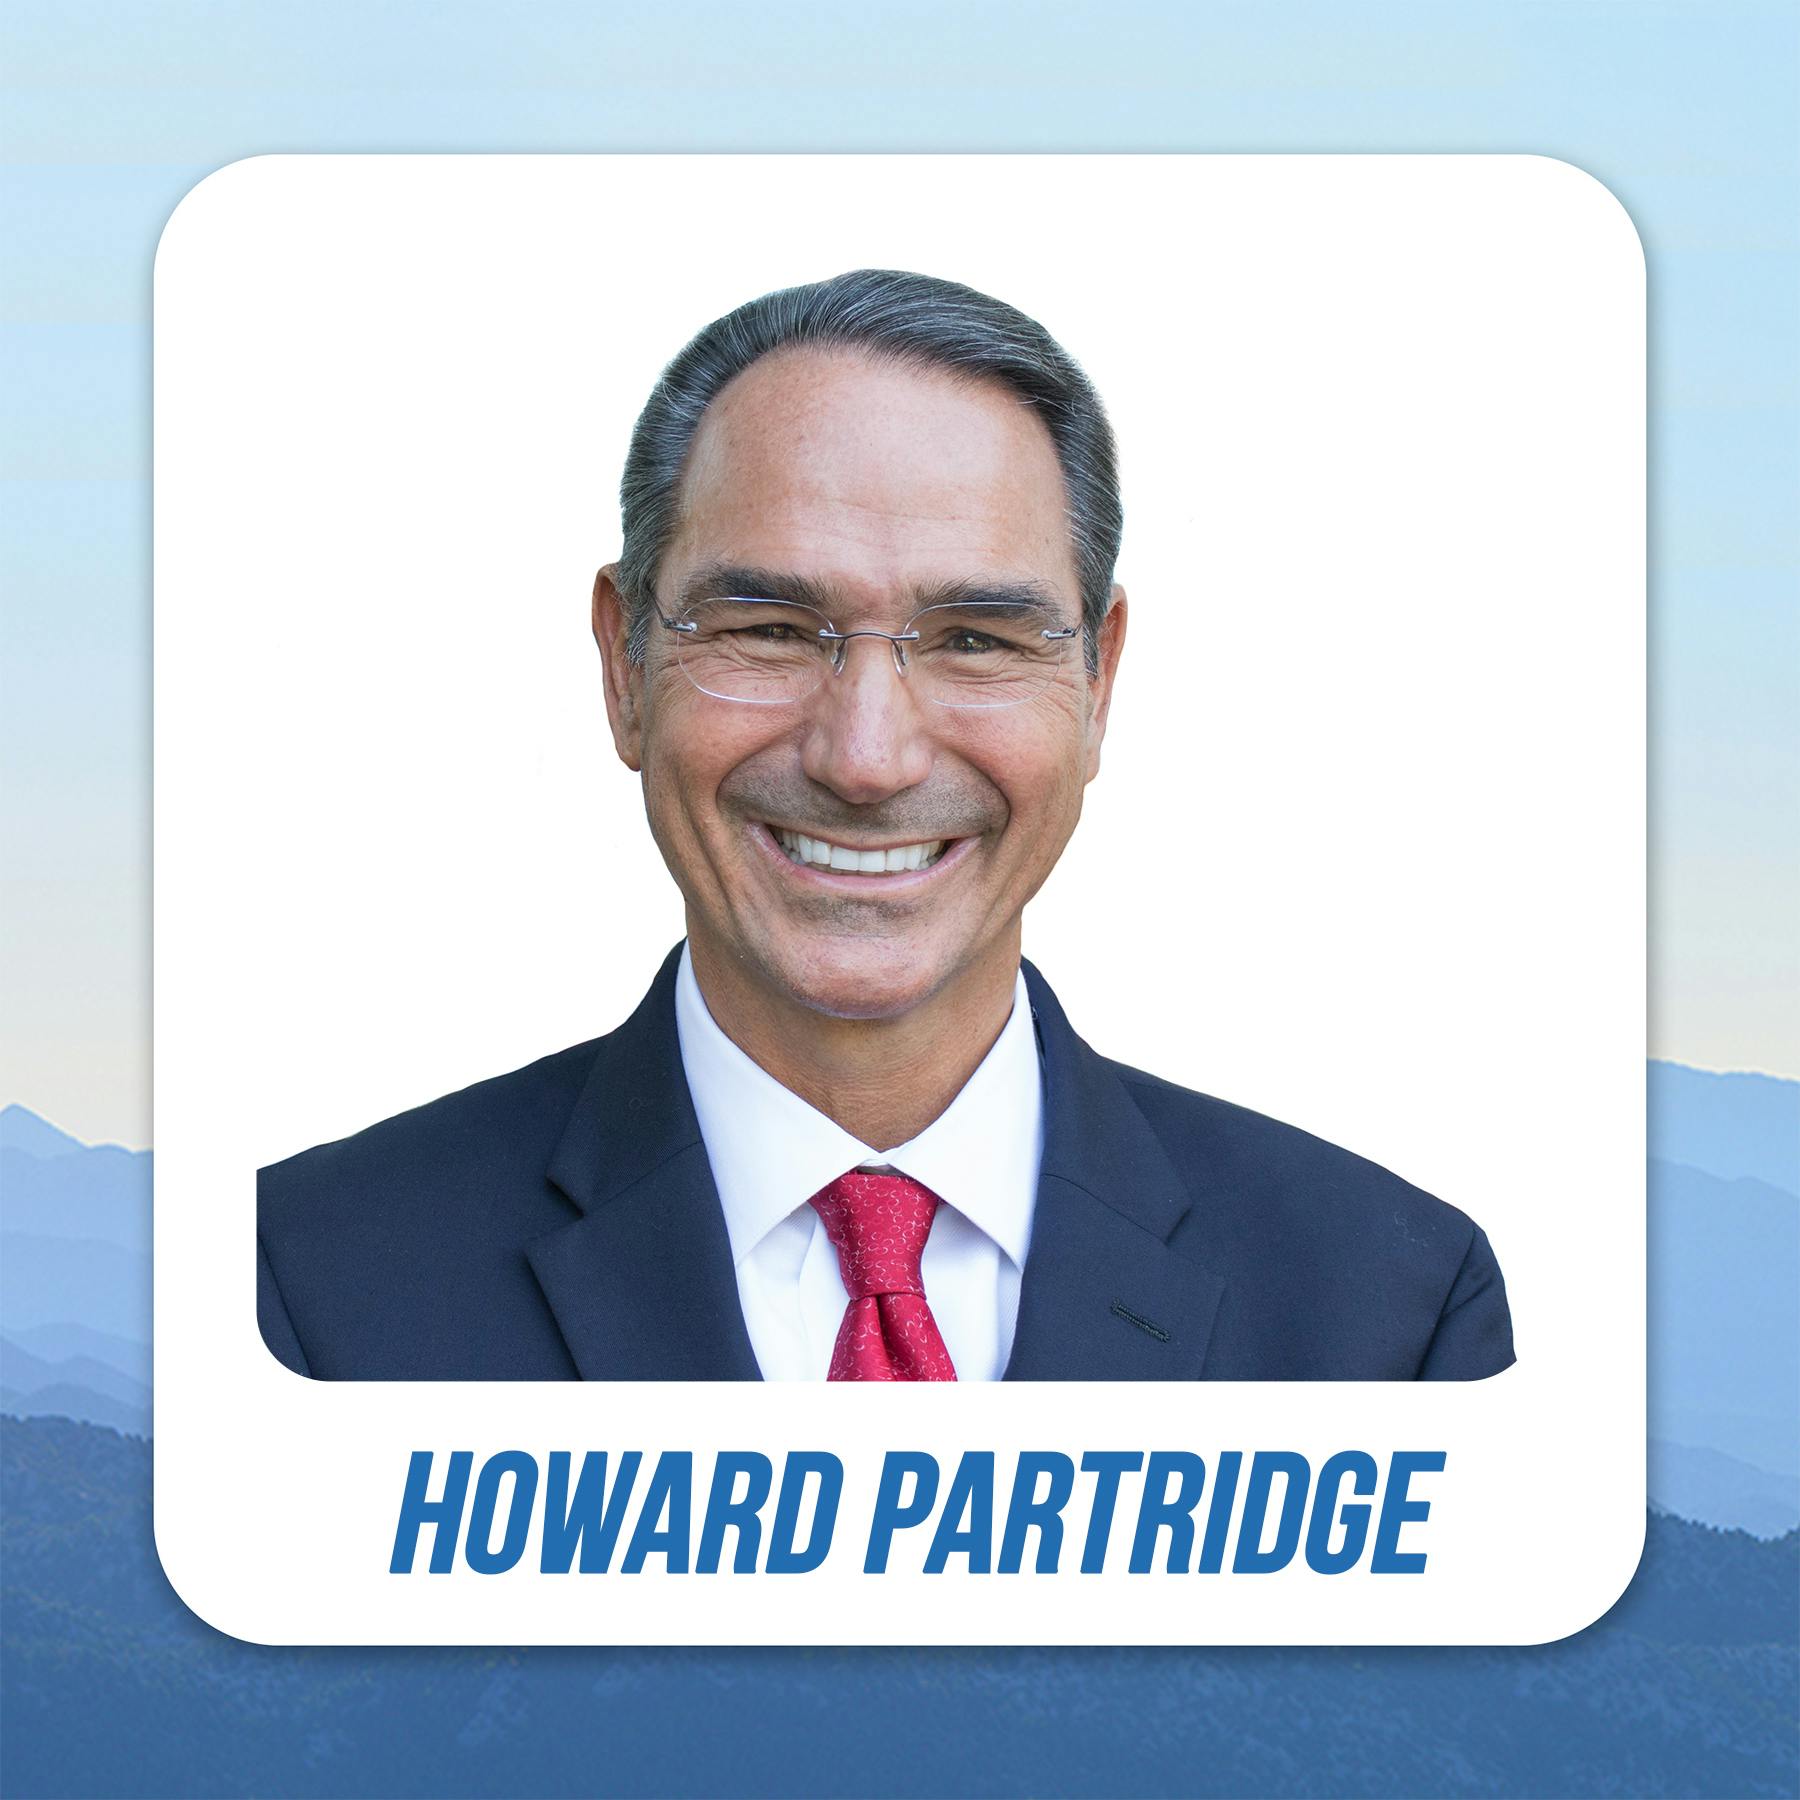 Building a Turnkey Business with Howard Partridge